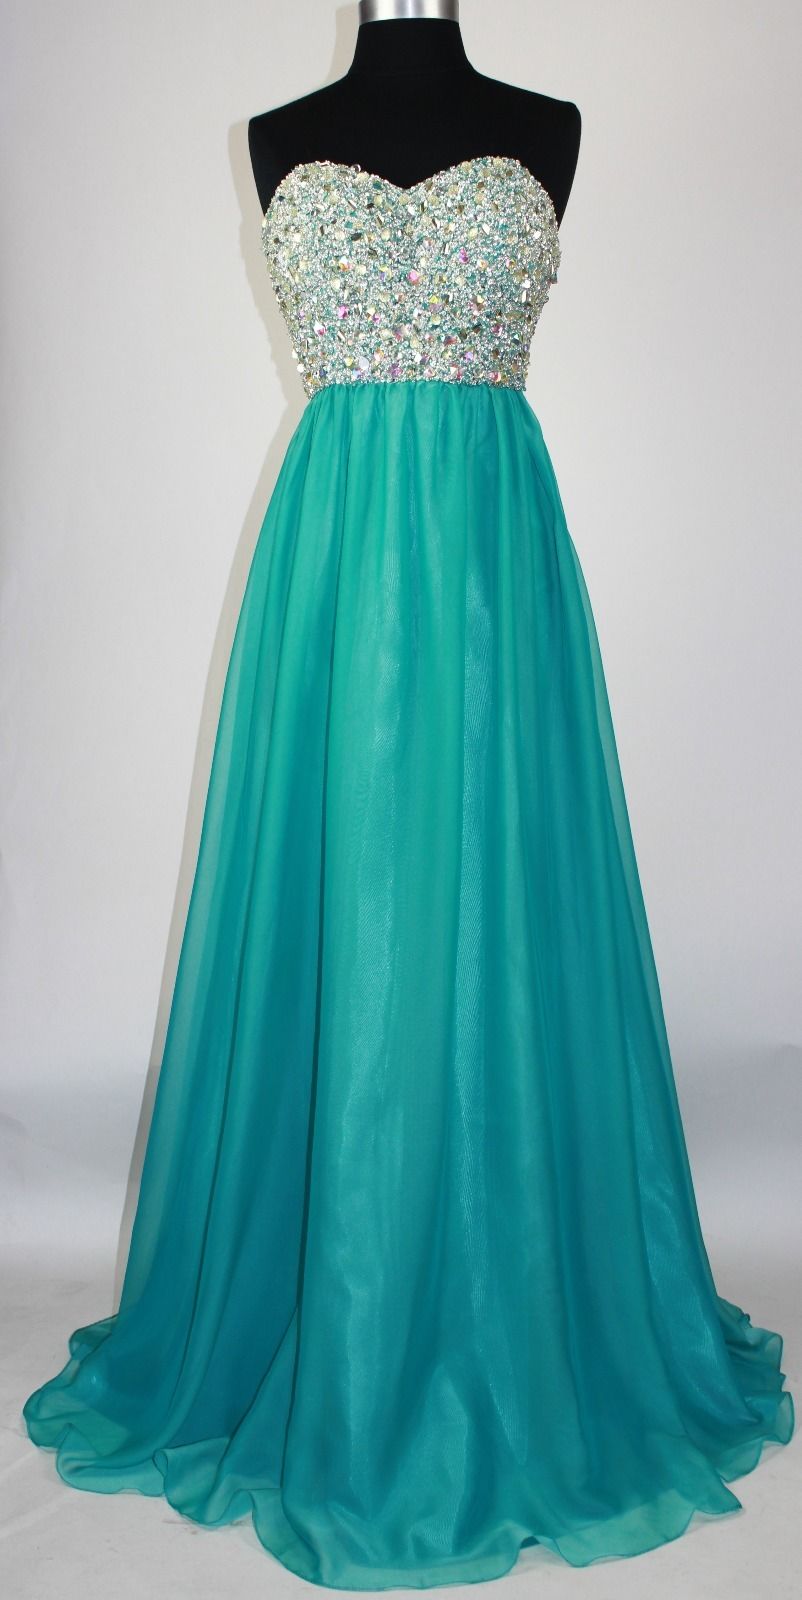 Teal Prom Dresses Long Elegant Strapless Beaded Evening Gowns - Formal Dresses, Party Dress